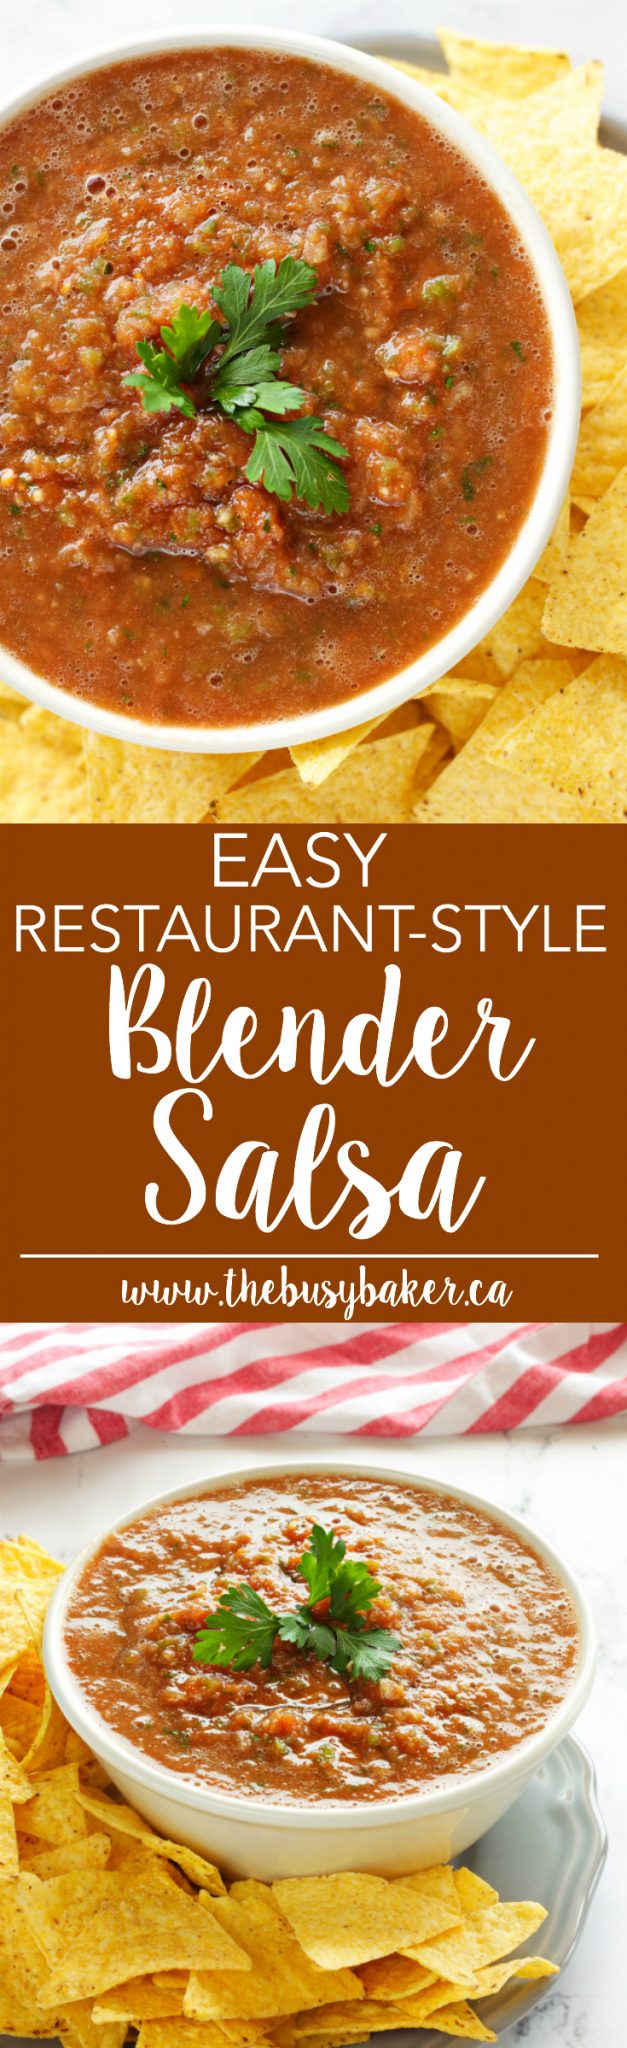 This Easy Restaurant Style Salsa recipe is a fresh homemade blender salsa that's perfect for serving with all your favourite Mexican foods! It's so easy to make - just throw the ingredients in the blender and serve! Recipe from thebusybaker.ca! #blendersalsa #homemadesalsarecipe #salsarecipe #easyhomemadesalsa #restaurantstylesalsa via @busybakerblog